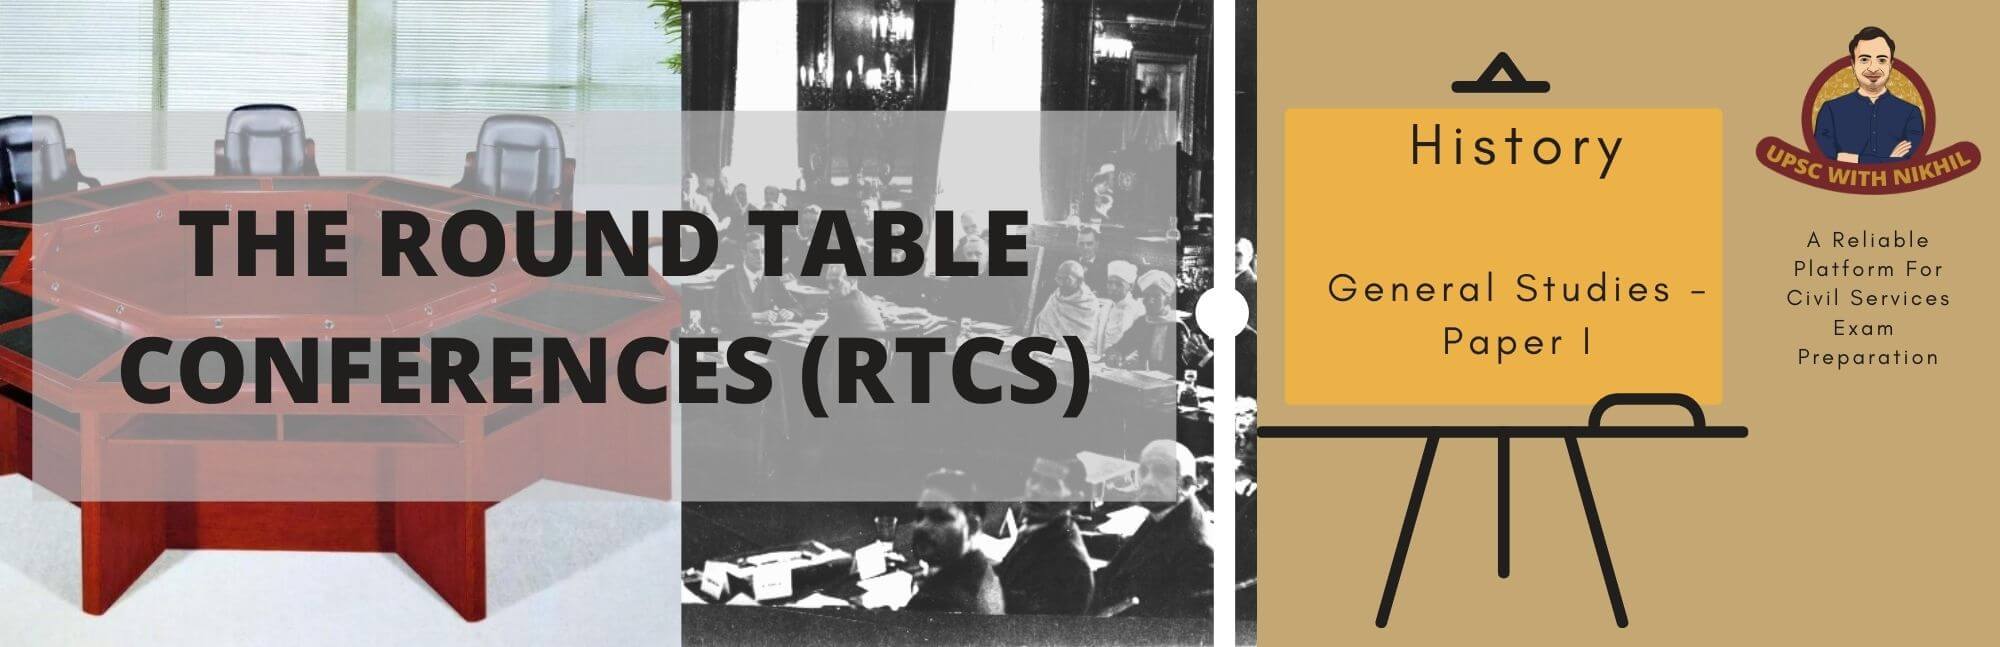 The Round Table Conferences Rtcs, How Many Round Table Conference Was Held